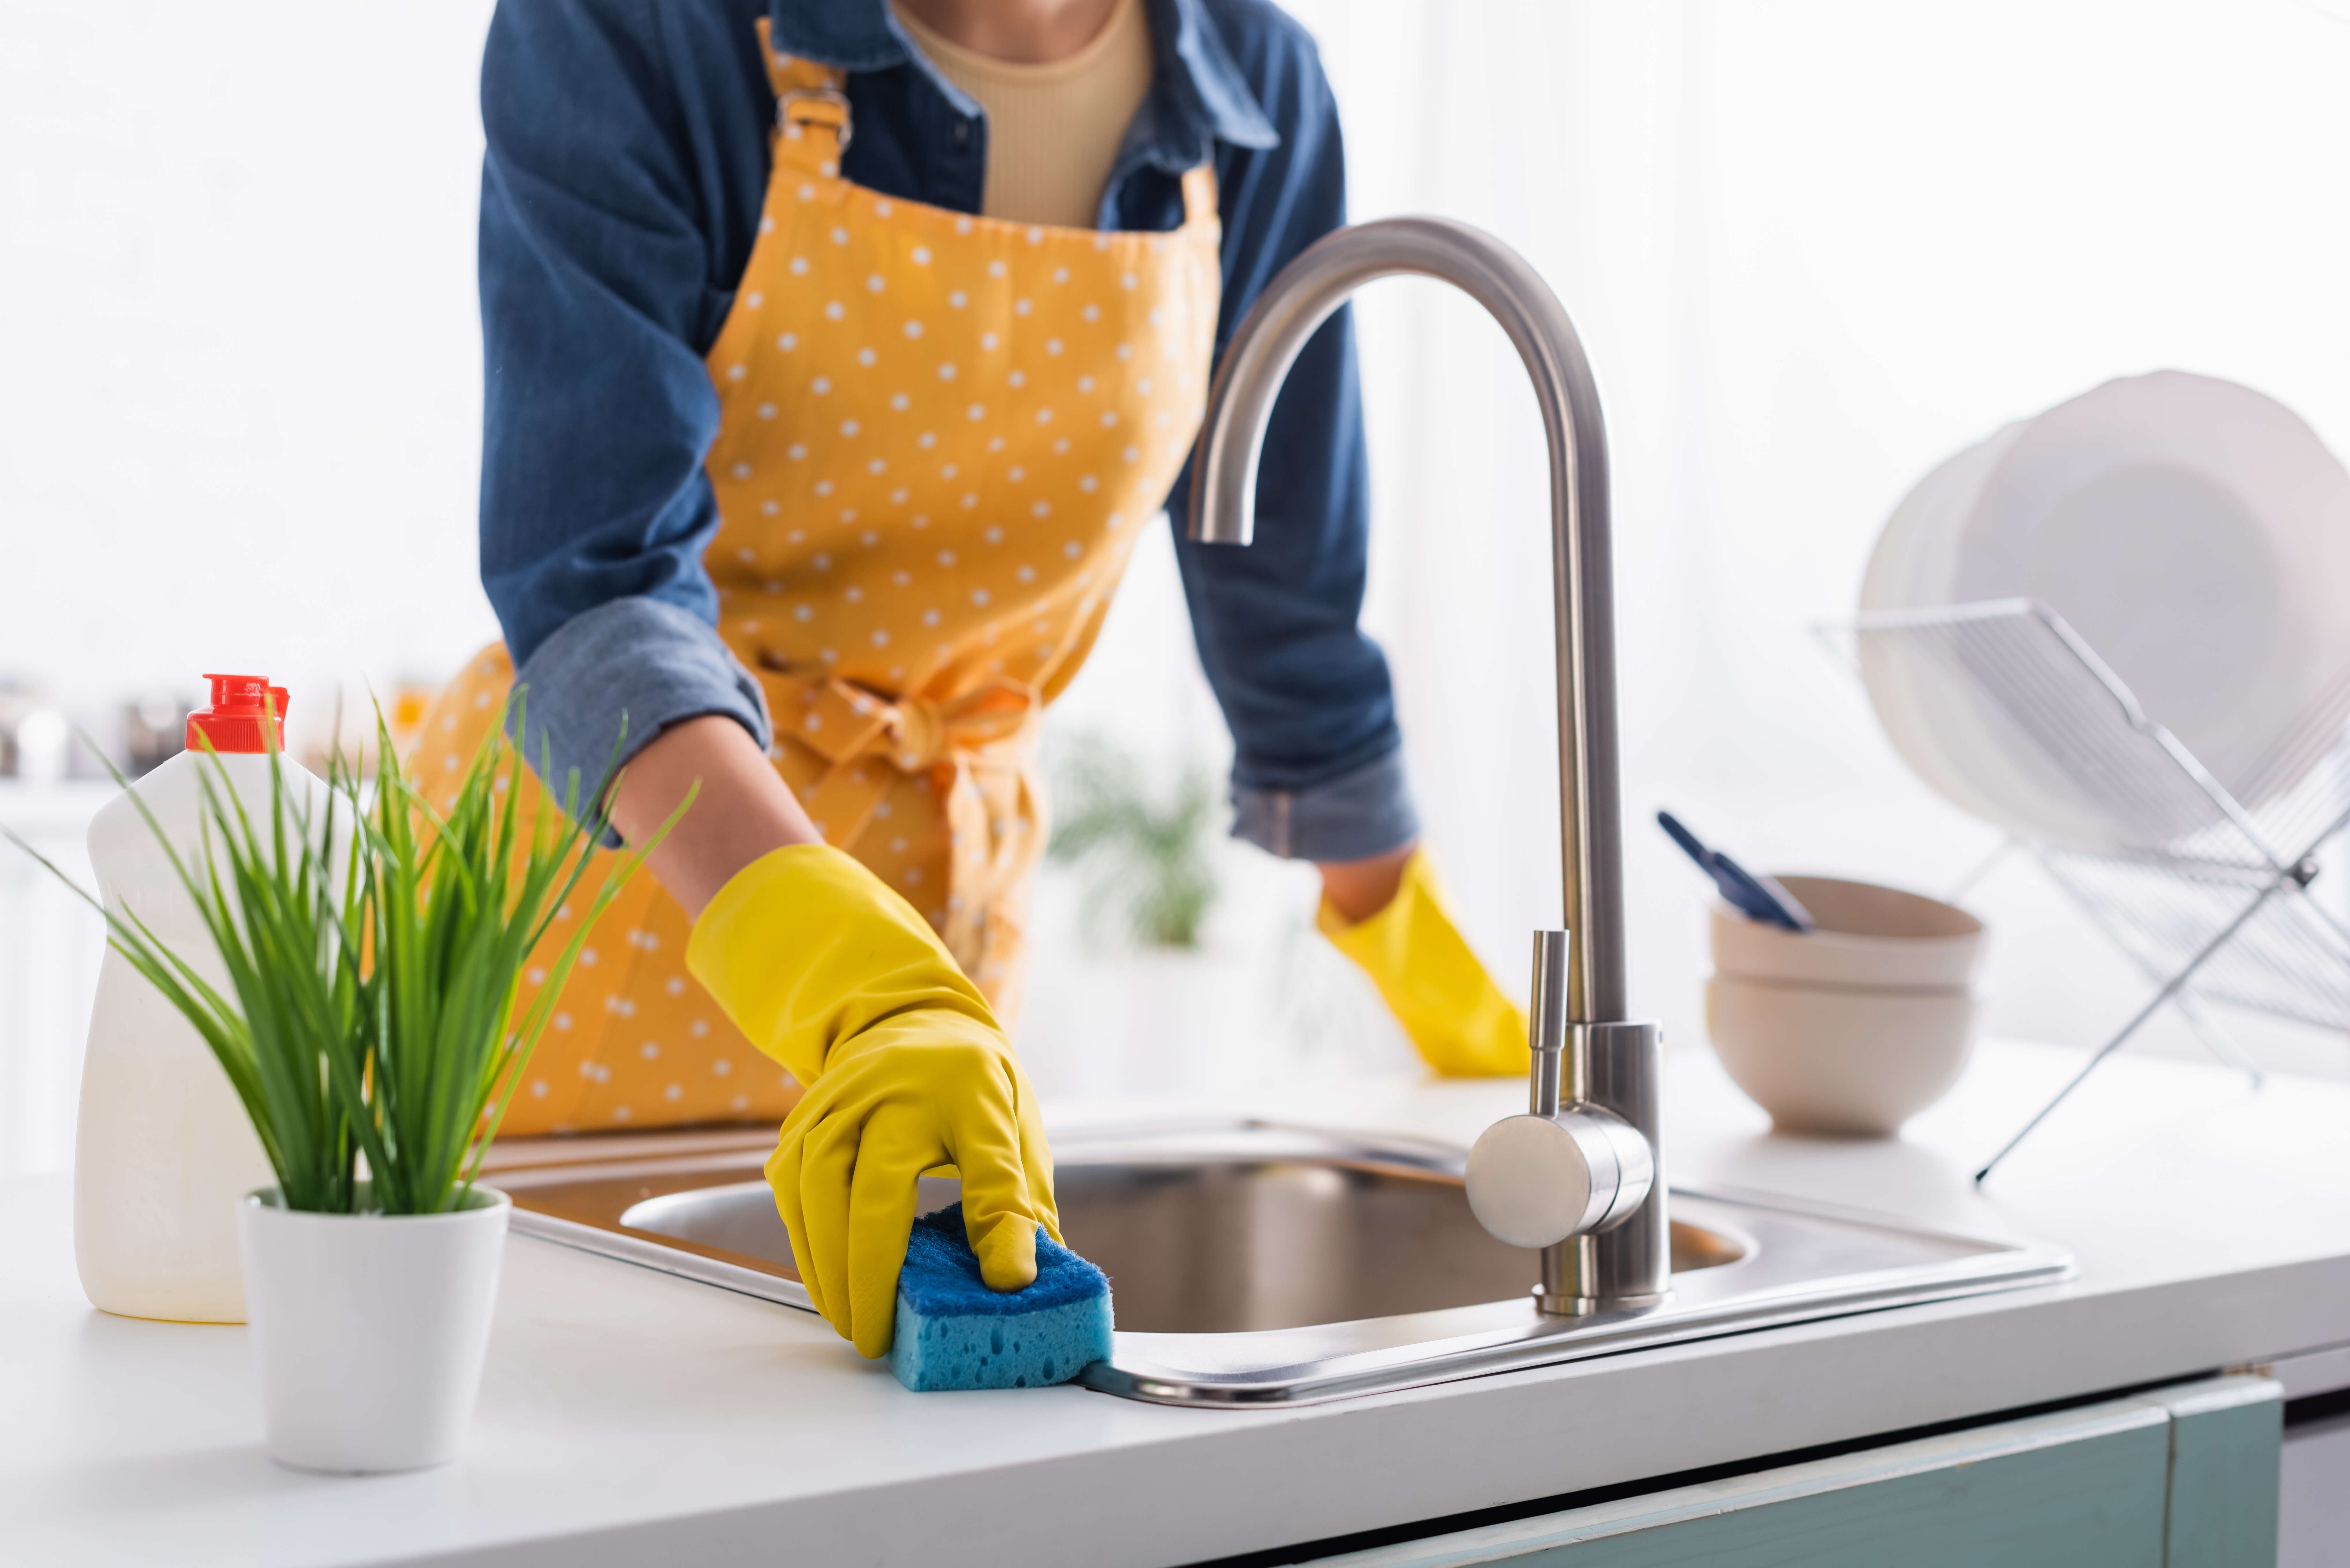 Guide to spring cleaning your kitchen